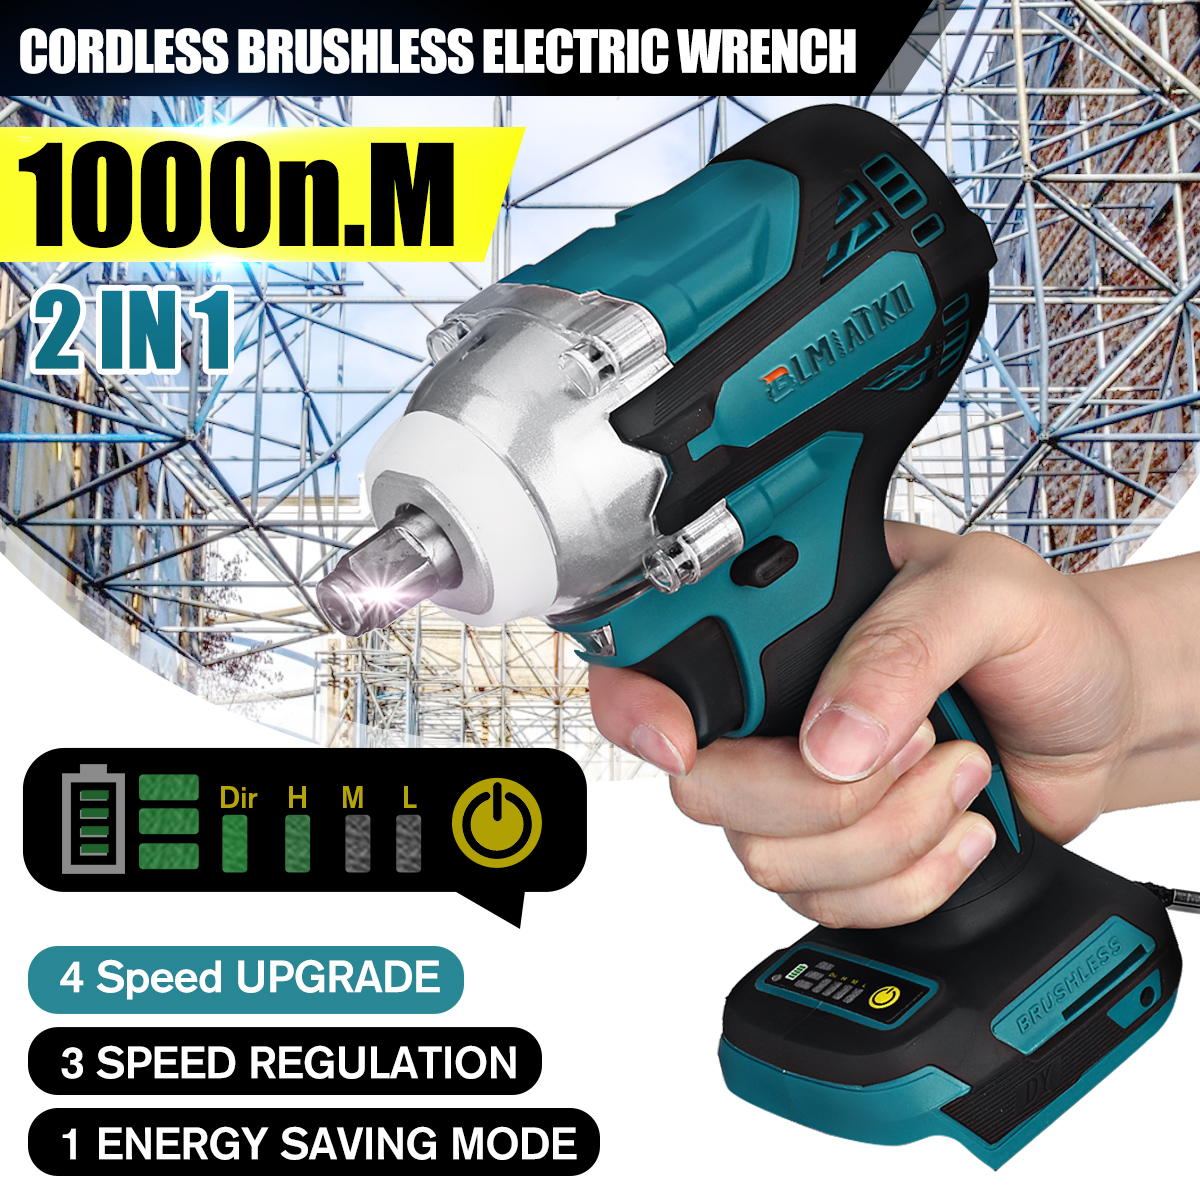 480Nm-Brushless-Impact-Wrench-Cordless-High-Torque-12-Socket-Electric-Wrench-Screwdriver-Power-Tool--1841579-2